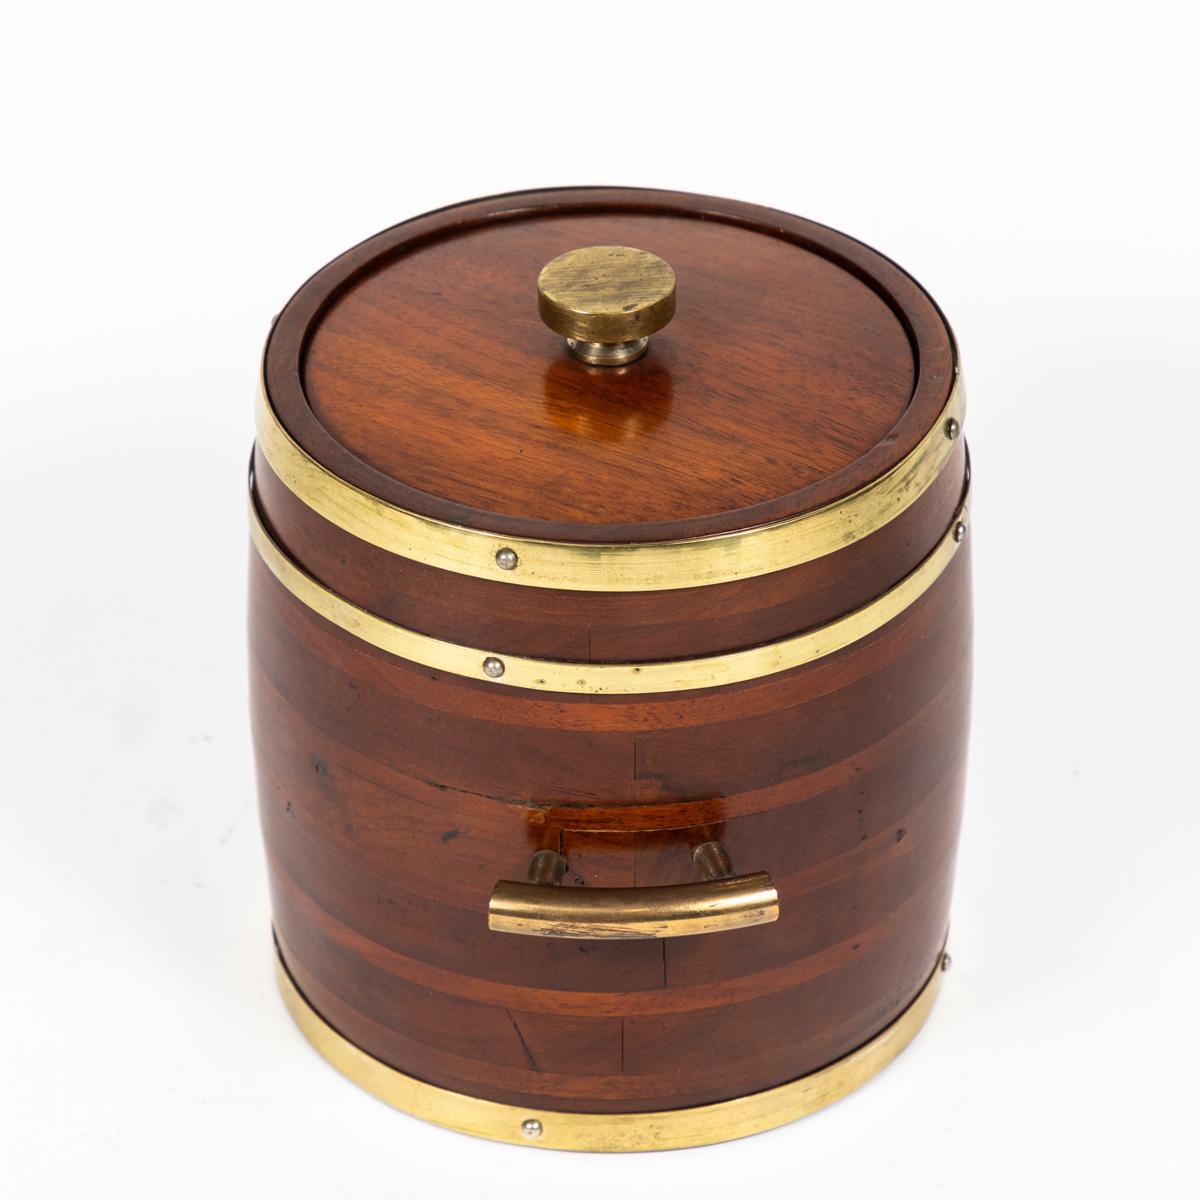 English Wooden Ice Bucket with Brass Fittings from England, circa 1920